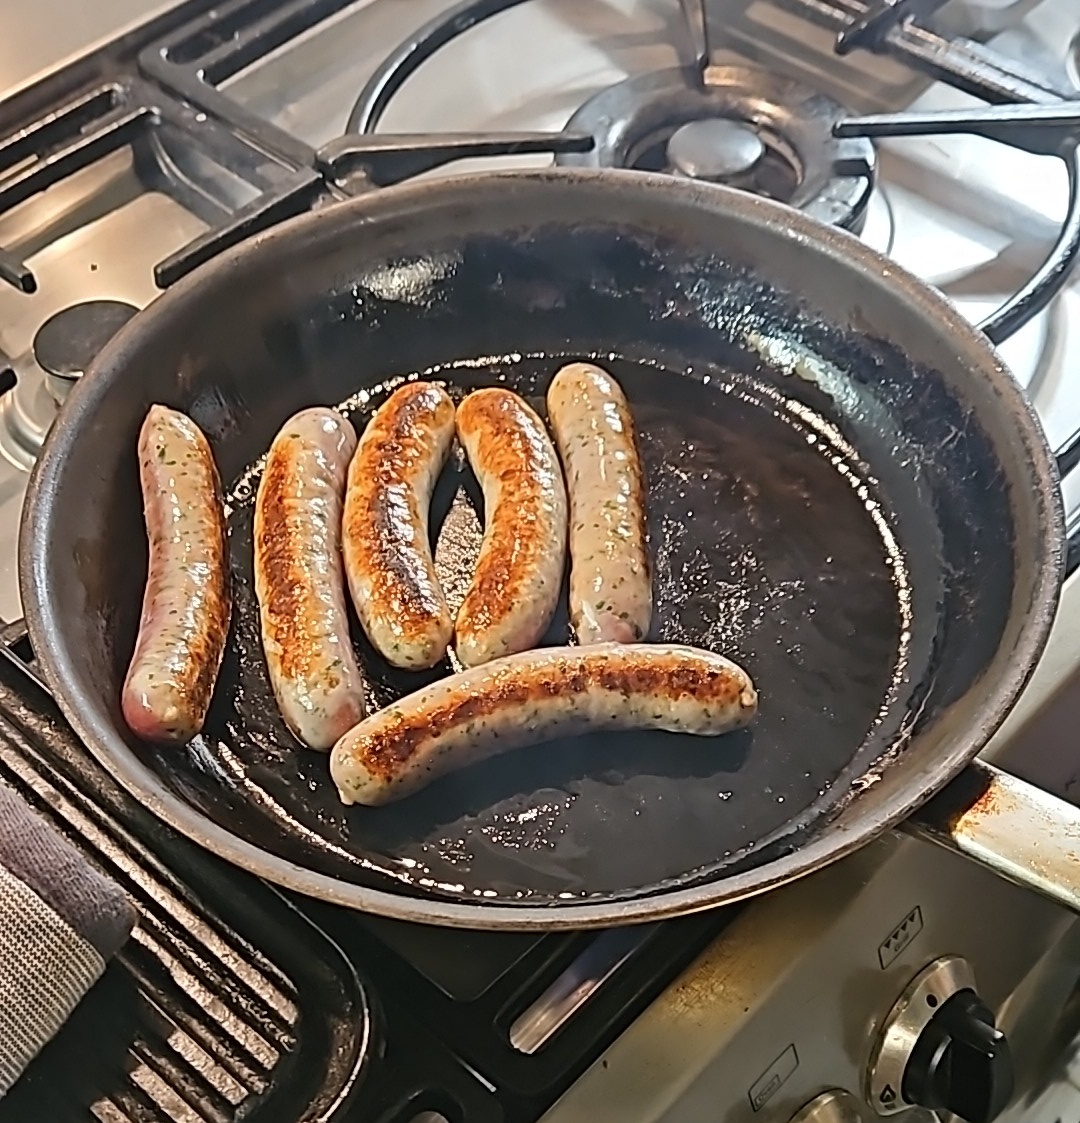 @o_burbidge @girlbutcher Great minds... Catherine is cooking @girlbutcher sausages too in order to make a sausage casserole. Yours looked great!